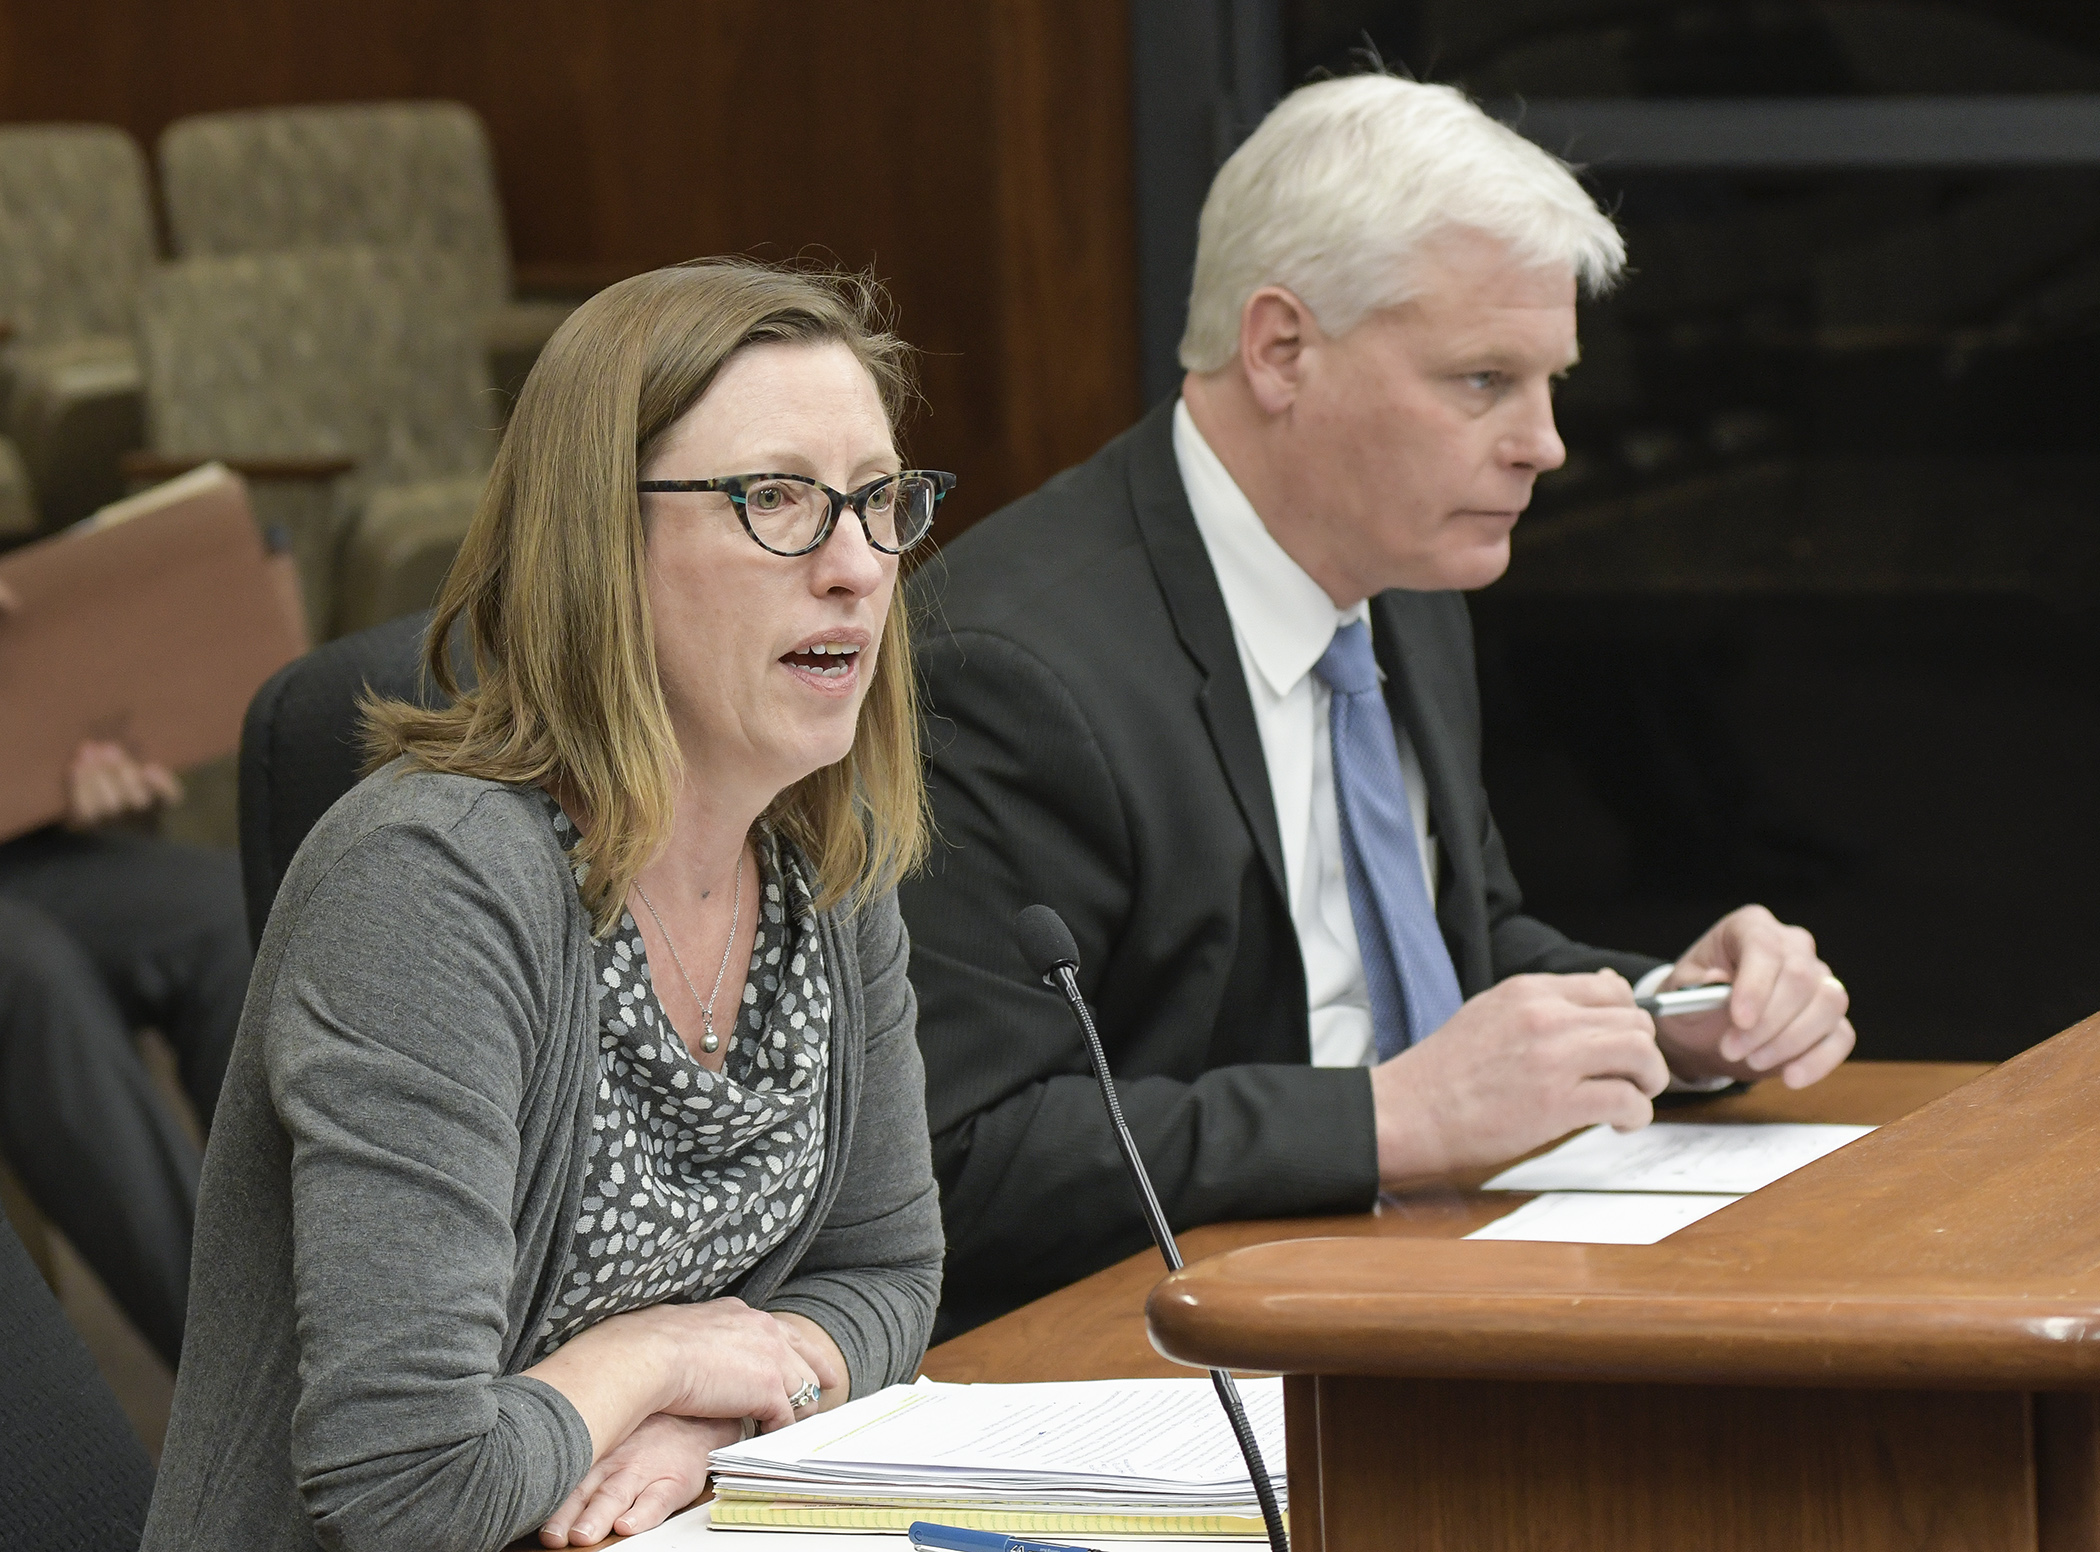 Lisa Stratton, co-founder and senior counsel at Gender Justice, testifies March 13 before the House Job Growth and Energy Affordability Policy and Finance Committee in support of a bill sponsored by Rep. Paul Thissen, right, that would prohibit employers from requiring disclosure of past wages. Photo by Andrew VonBank